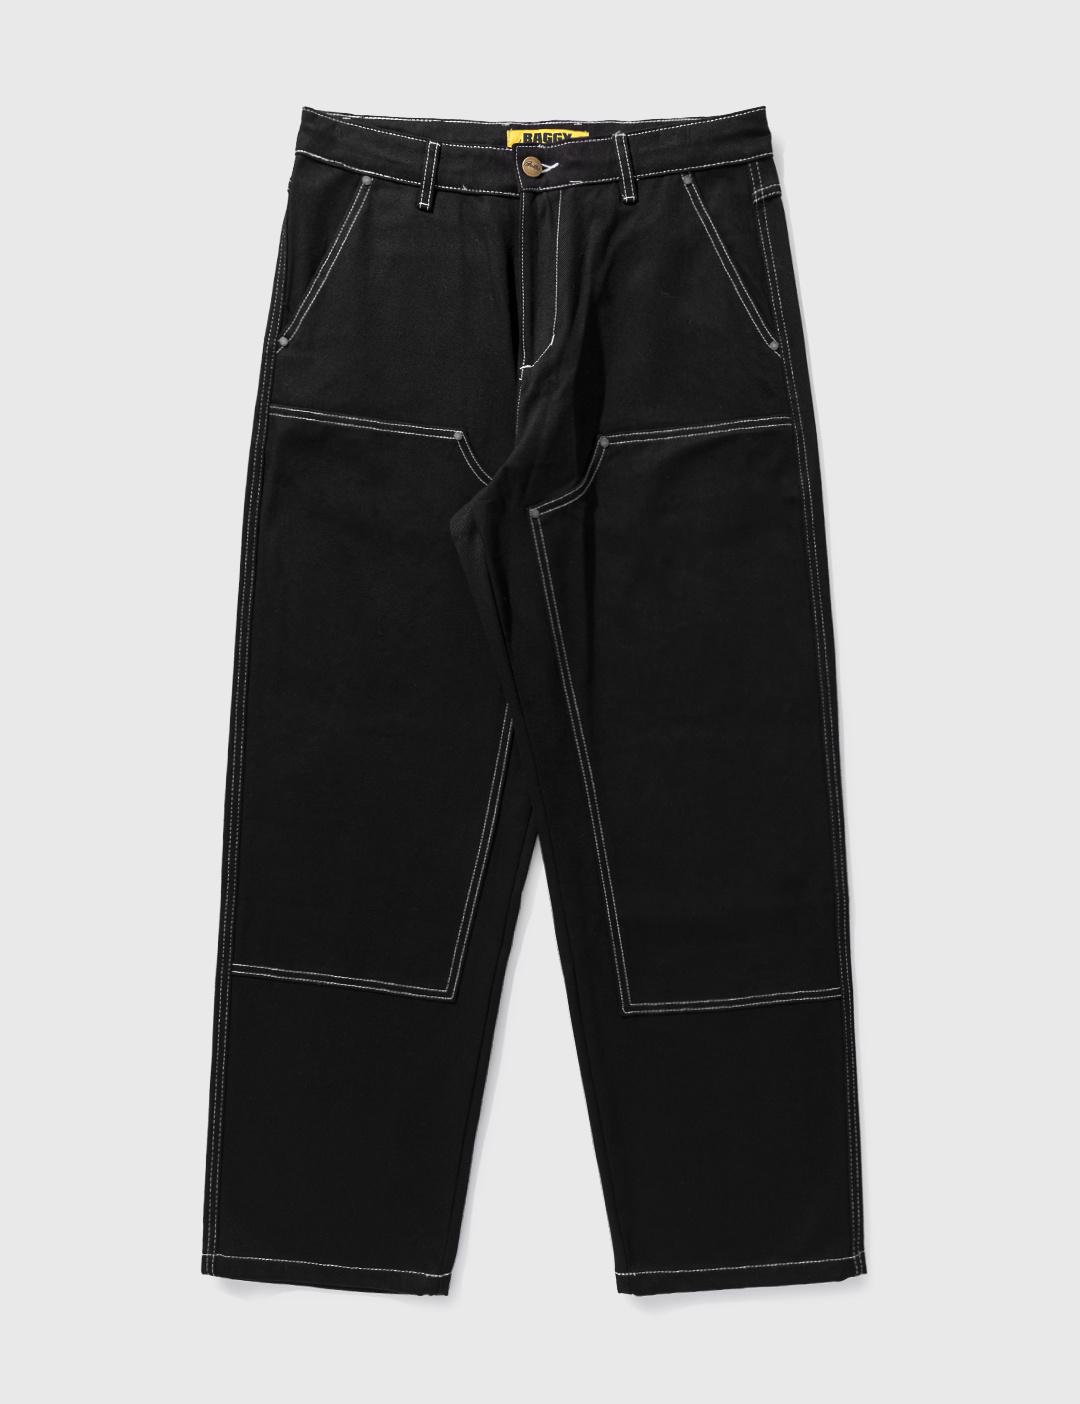 Double Knee Pants by BUTTER GOODS